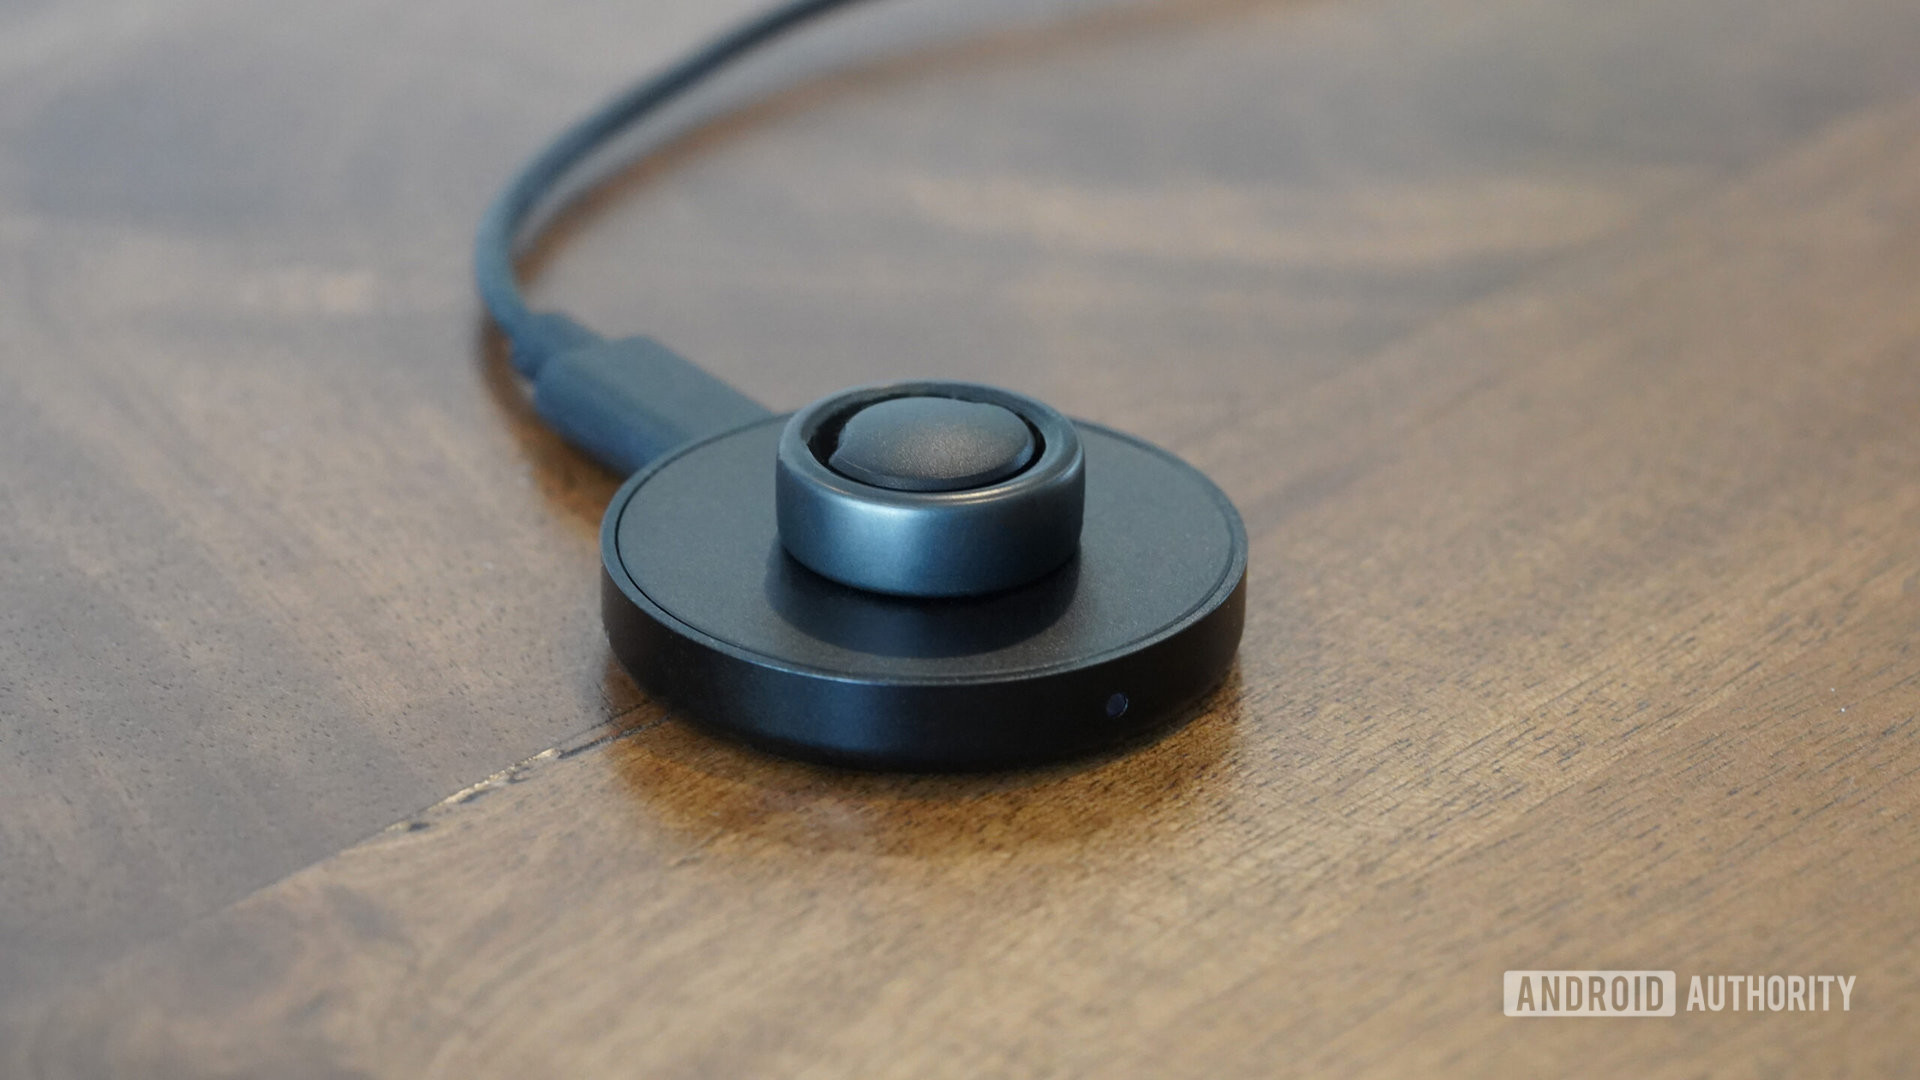 An Oura Ring 3 rests on its charger on a wooden surface.